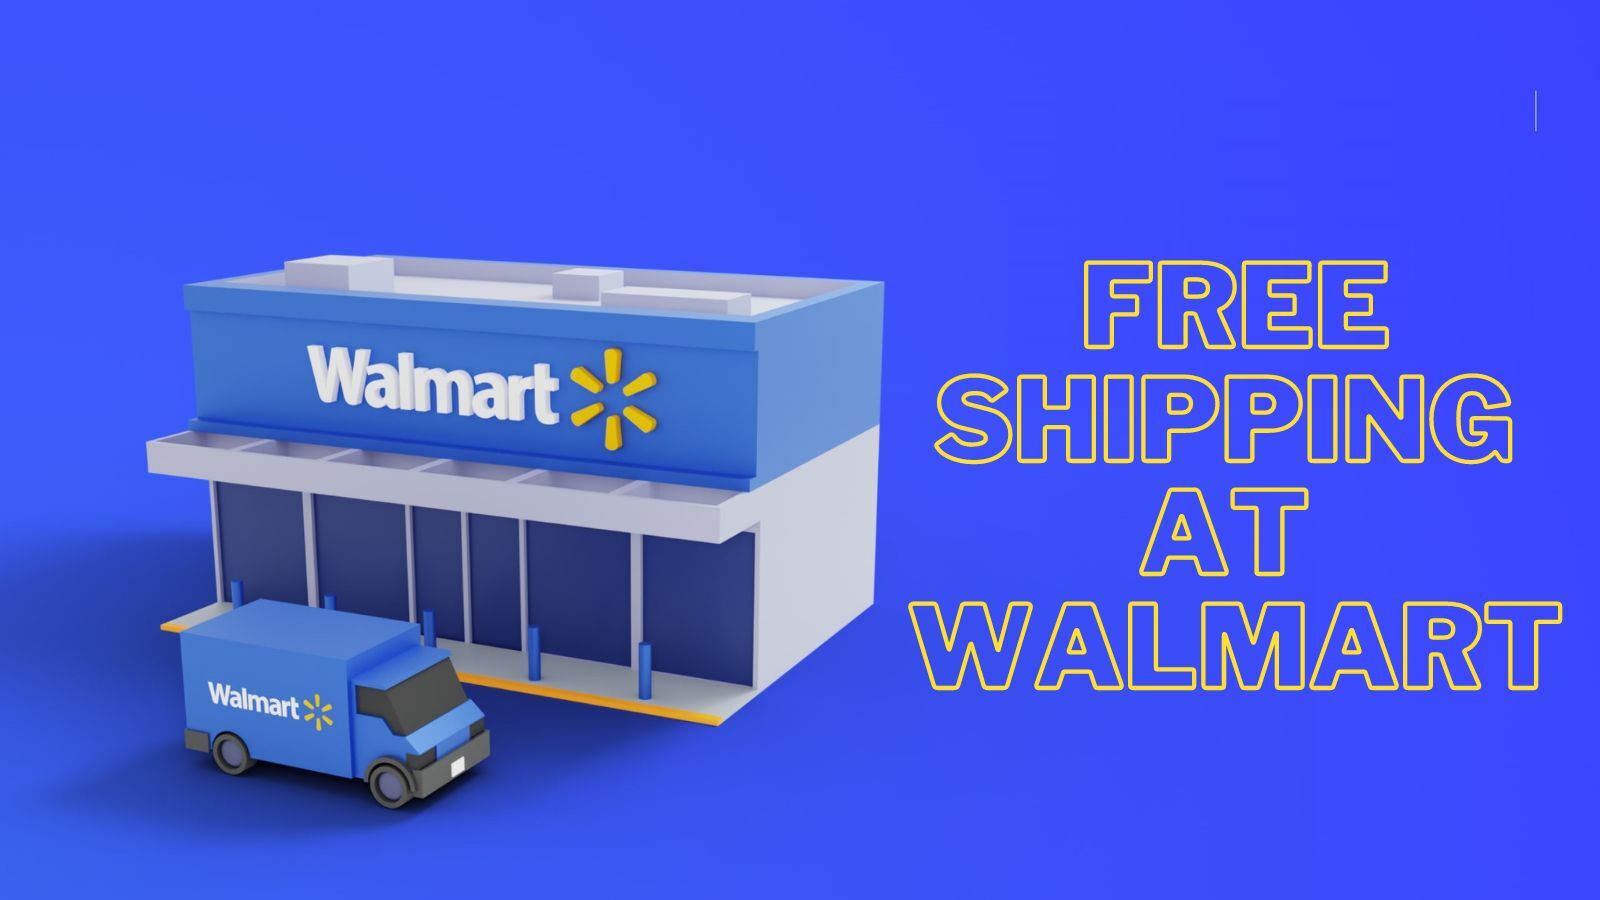 How To Get Free Shipping At Walmart? (A Full Guide)